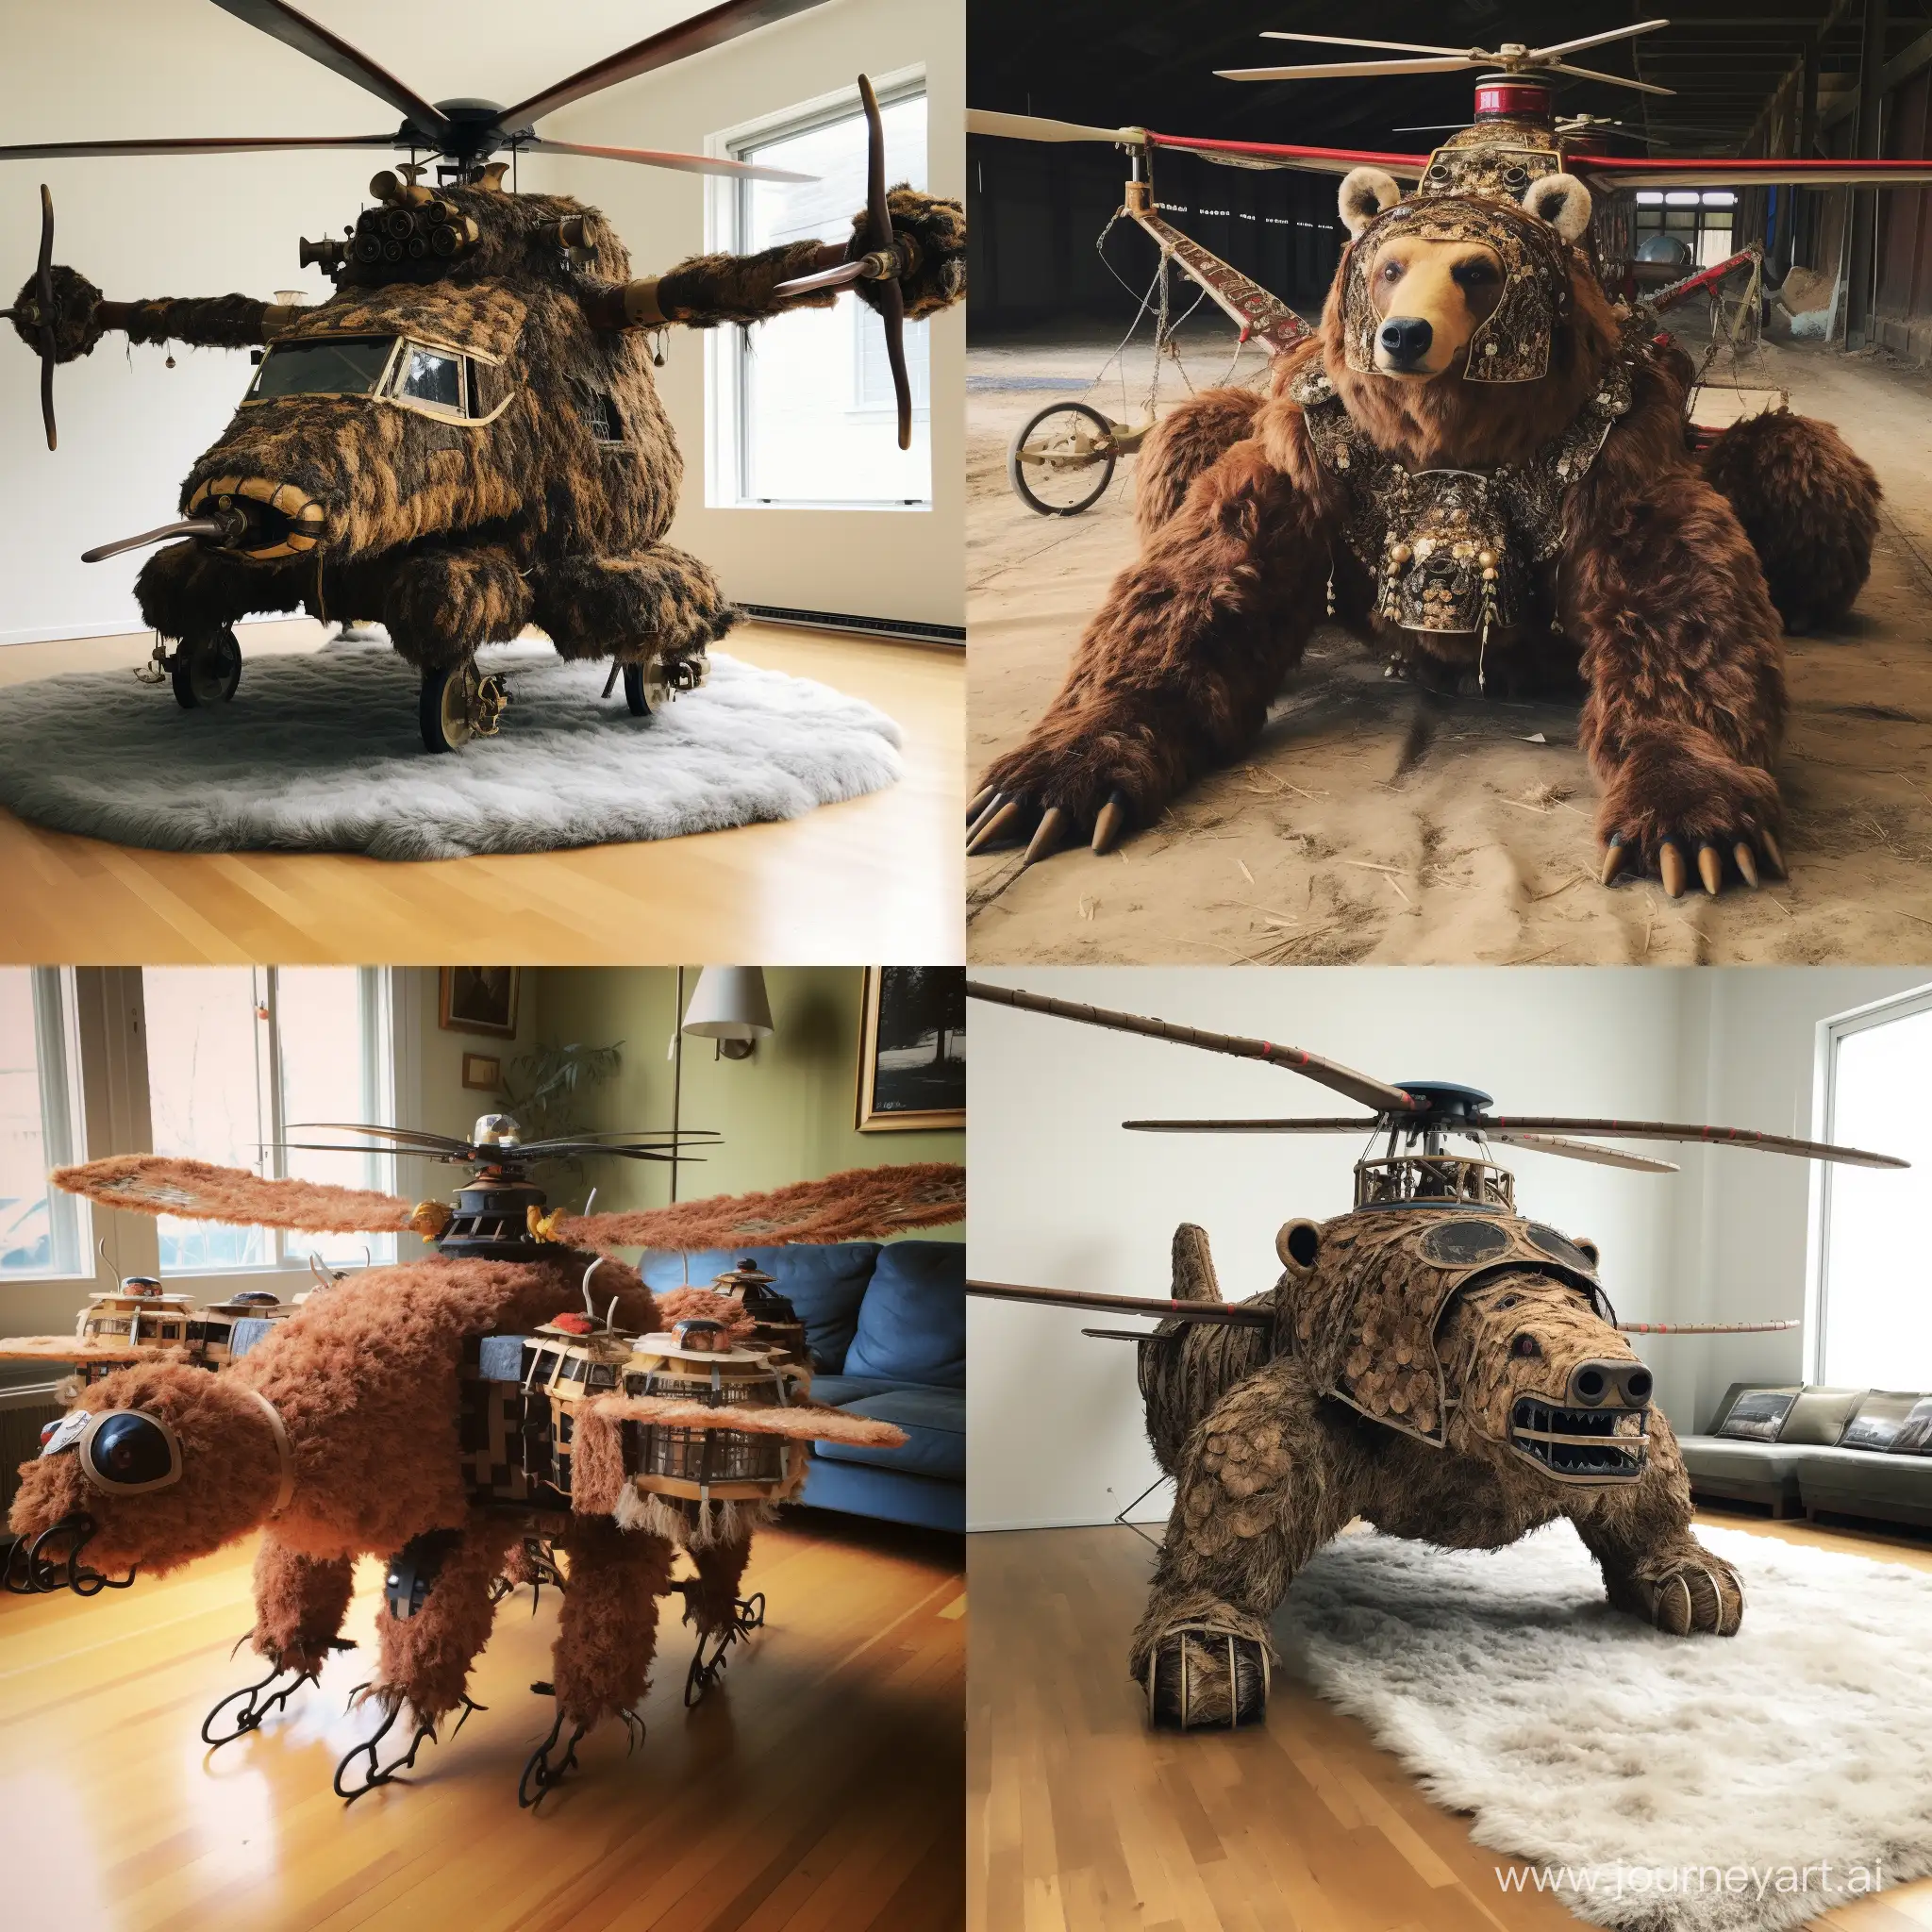 Copter made from bear rug